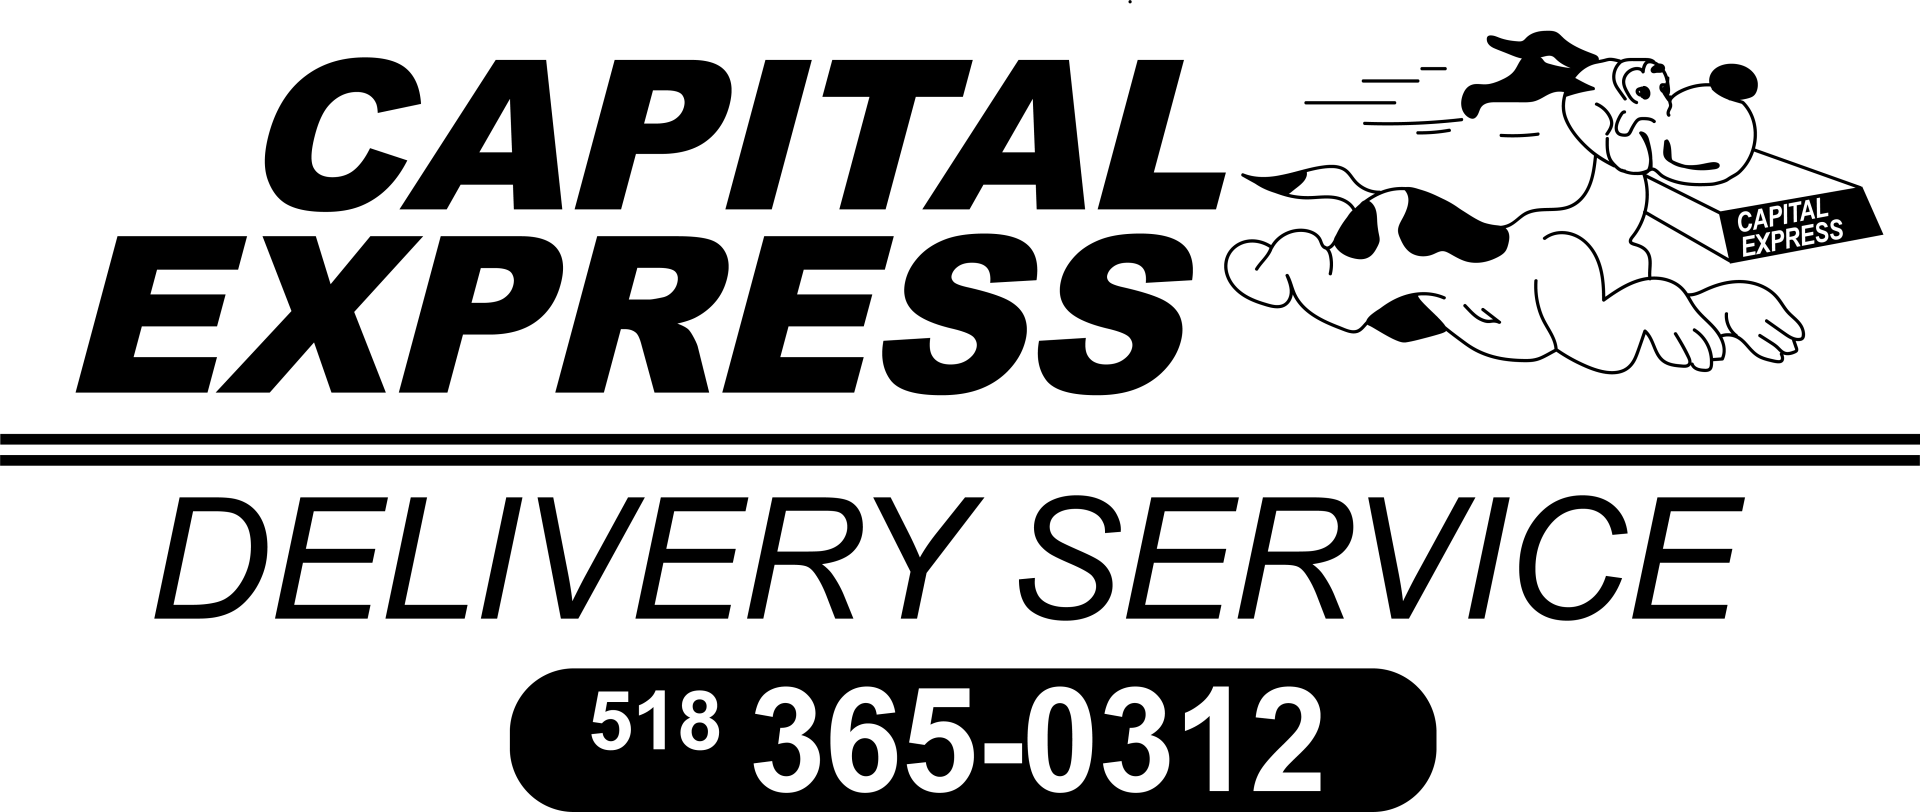 capital express delivery service logo